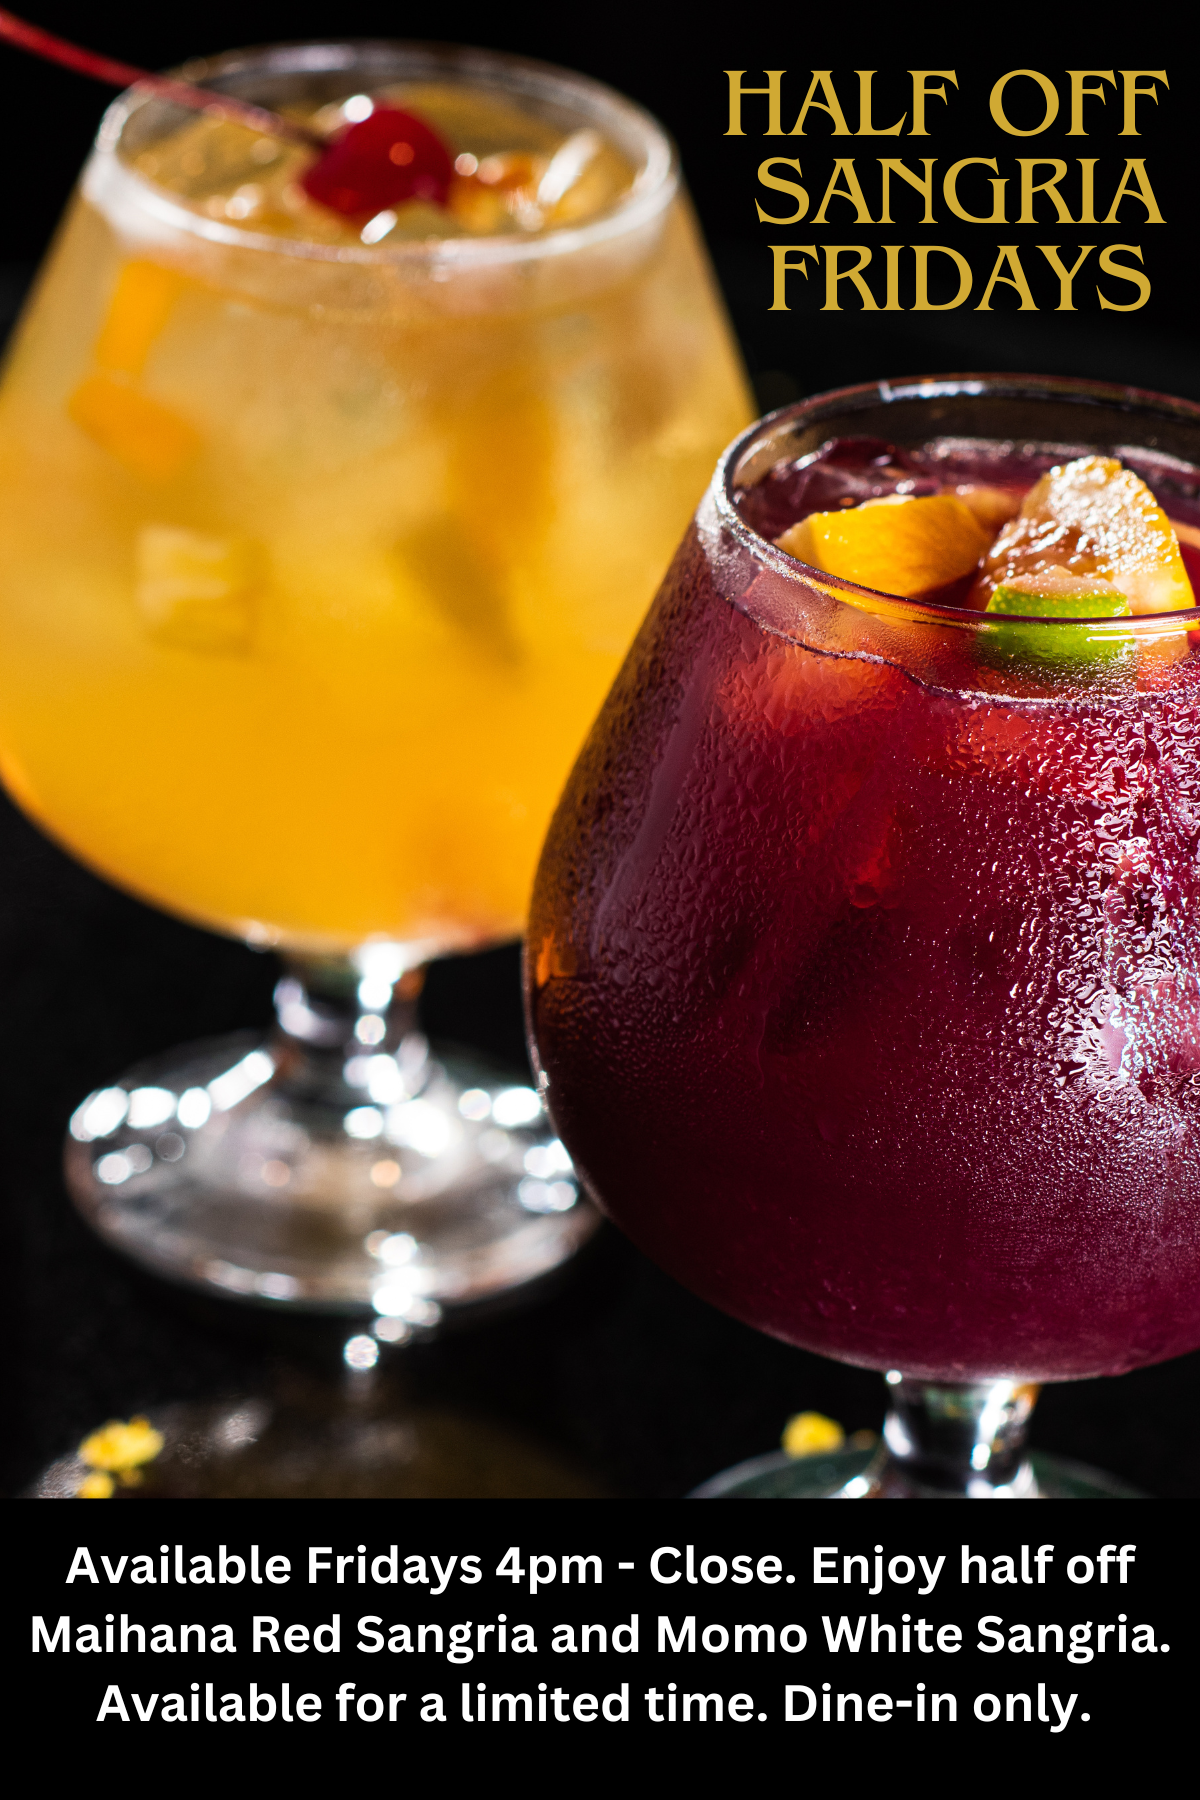 HALF OFF SANGRIA FRIDAYS. Available Fridays 4pm - Close. Enjoy half off Maihana Red Sangria and Momo White Sangria. Available for a limited time. Dine-in only. 